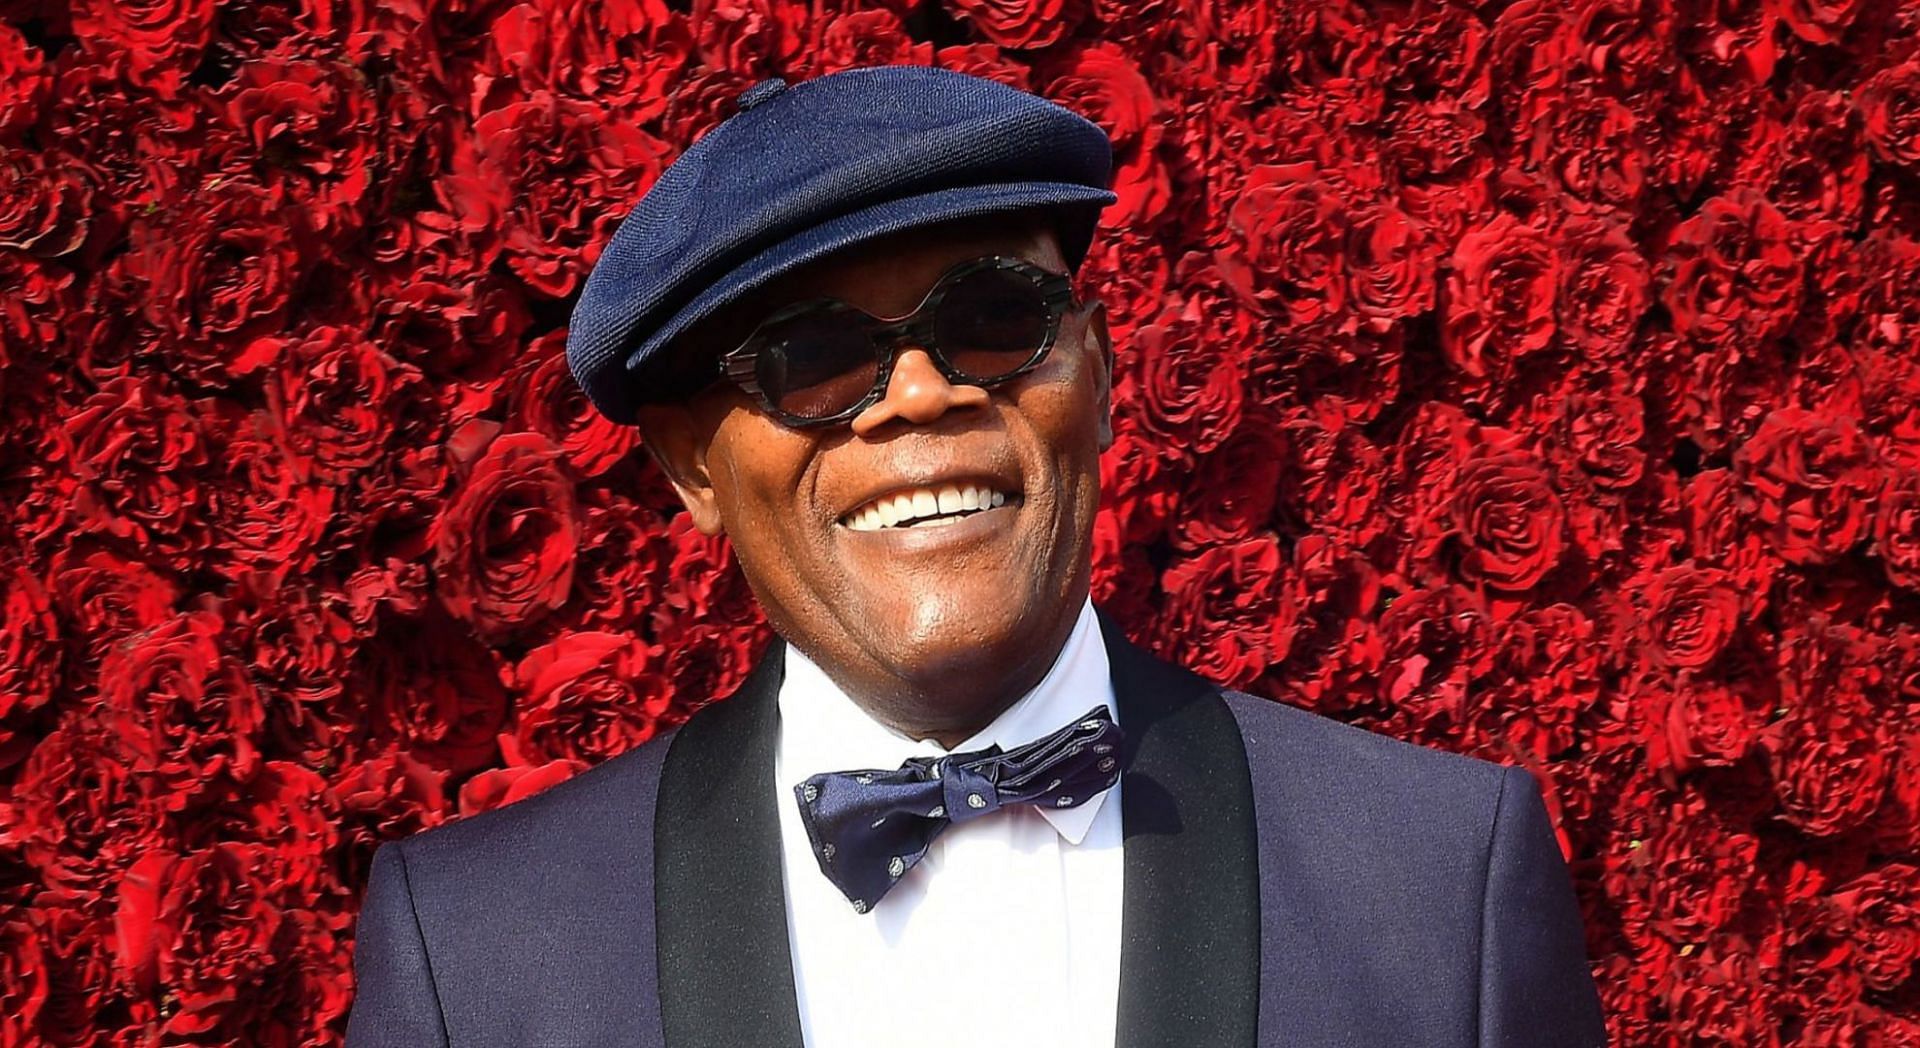 Samuel L Jackson trended online for accidentally liking adult videos on Twitter (Image via Getty Images)